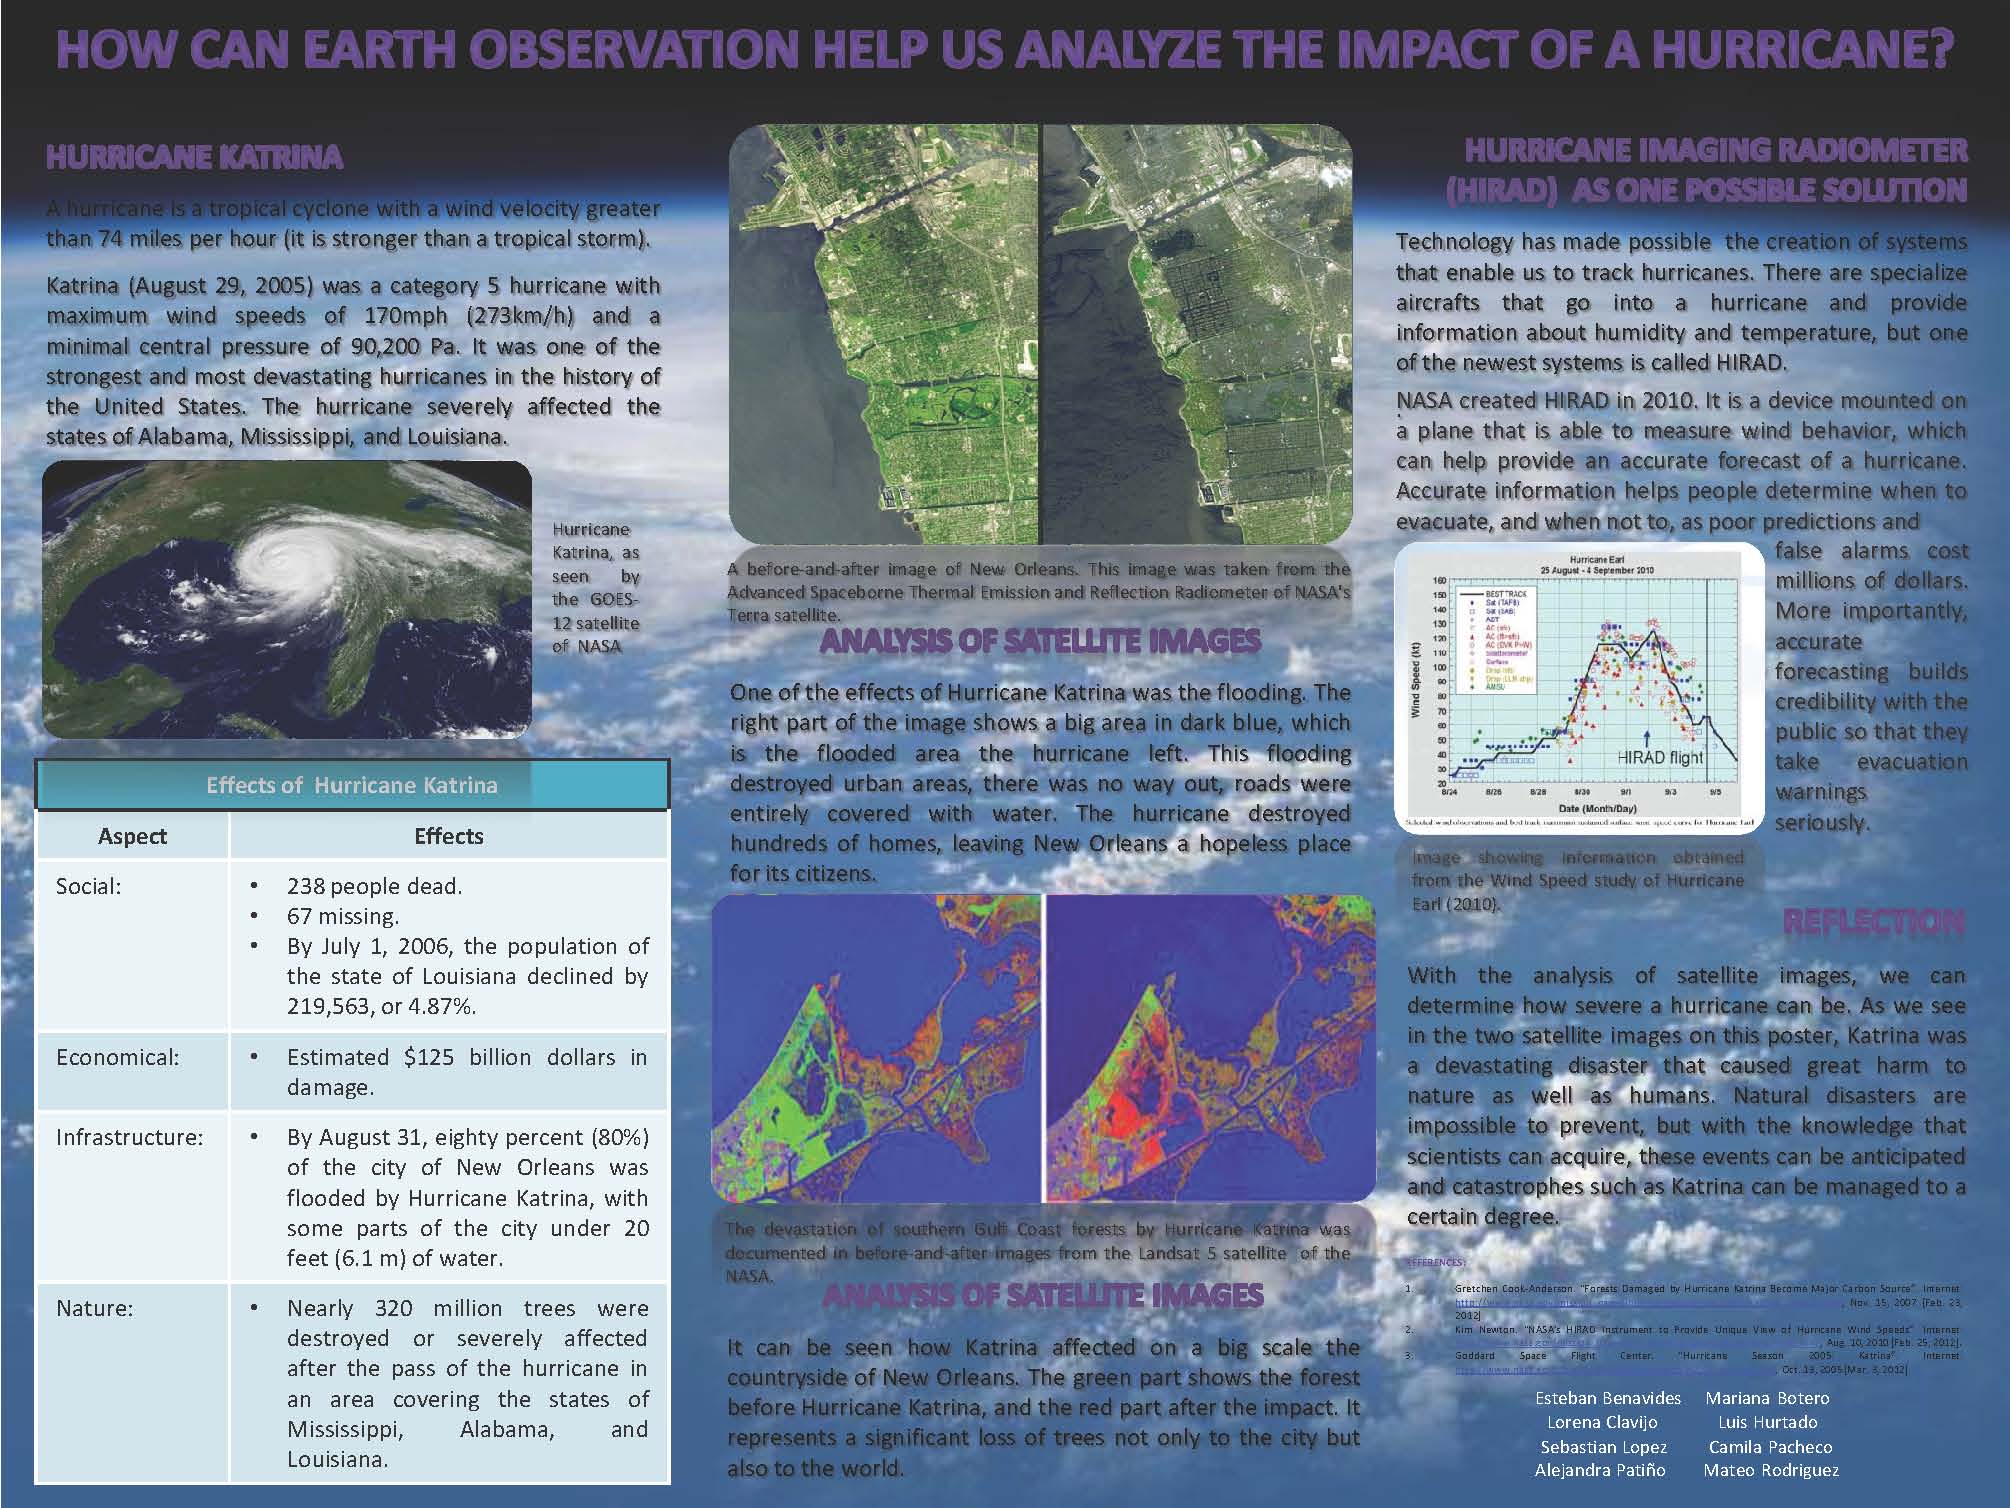 SGS Earth Observation Disaster themed poster